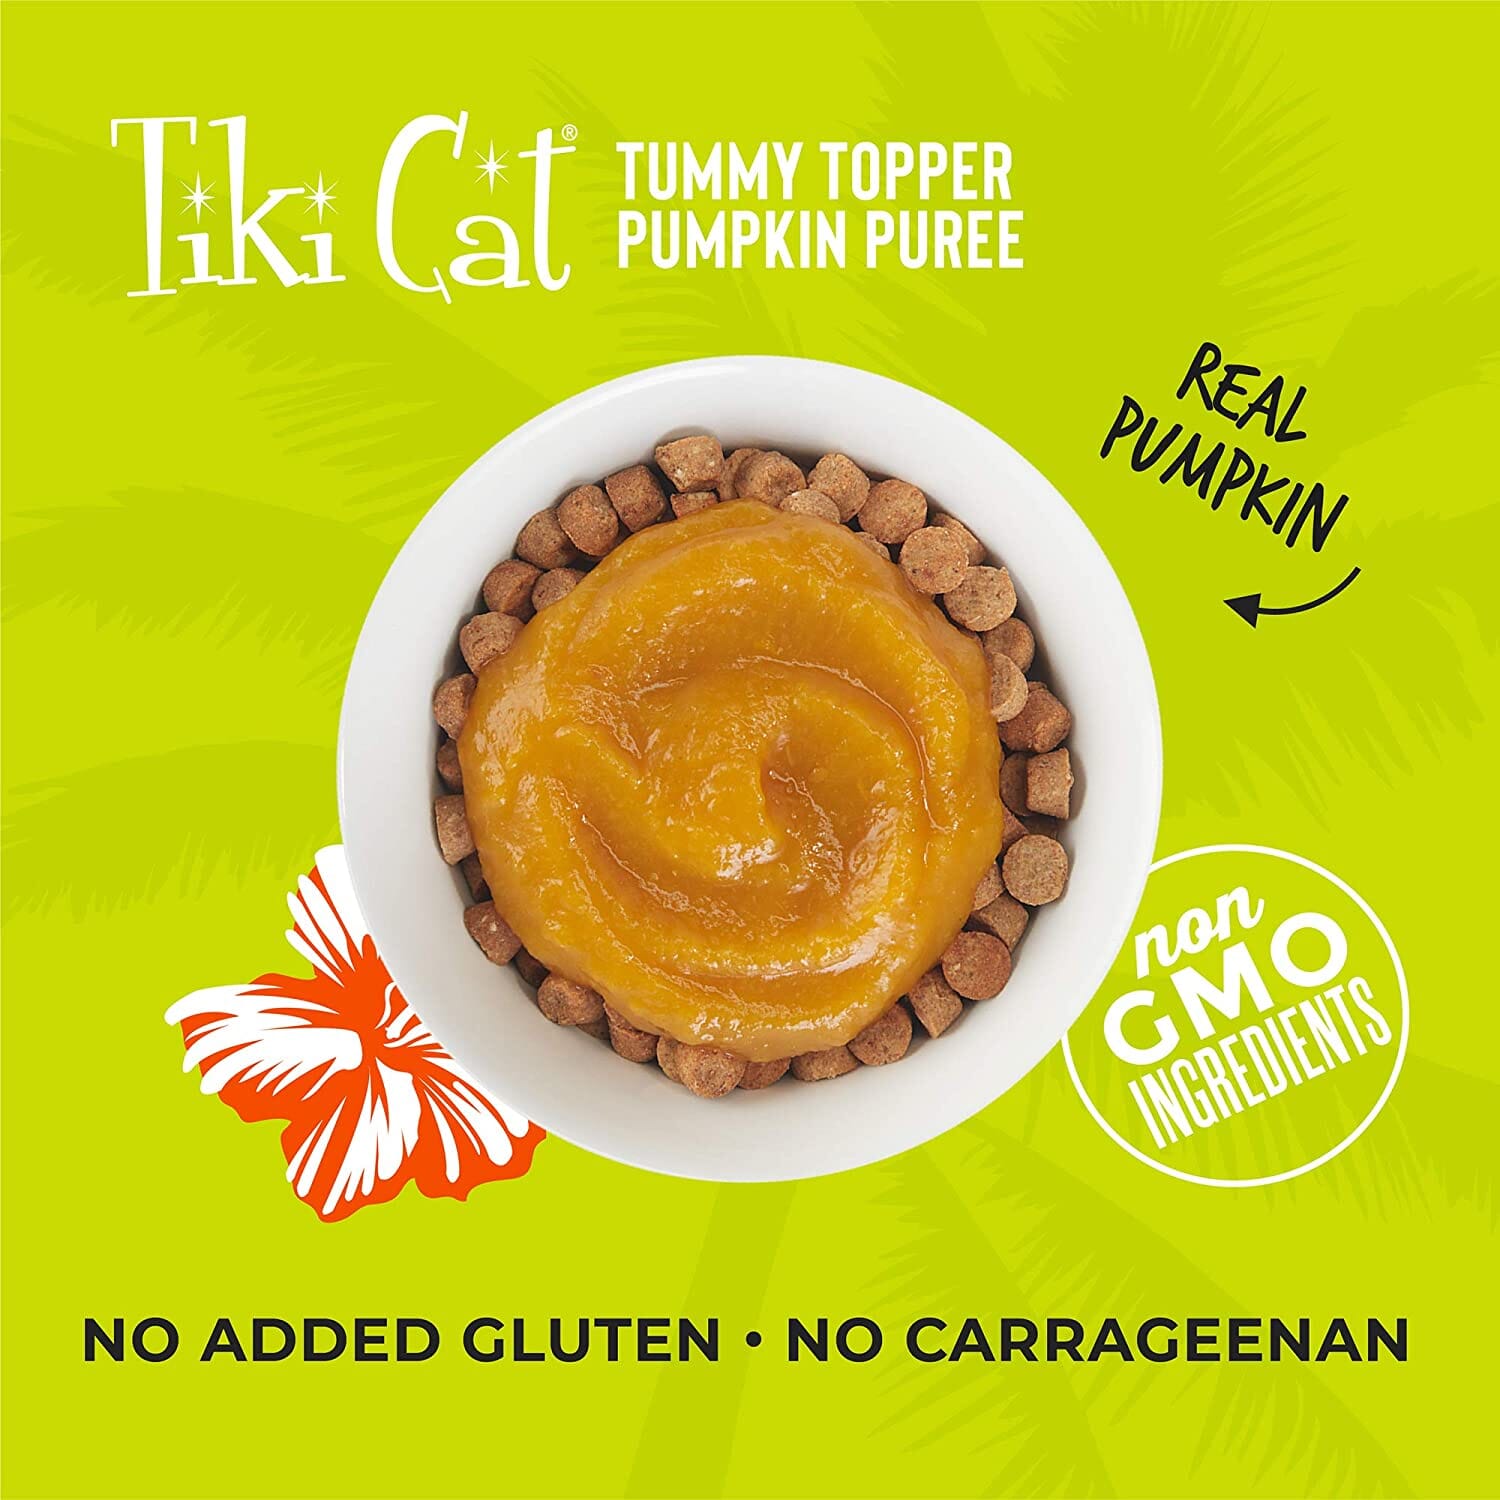 Tiki Cat Tummy Topper Pumpkin & Wheatgrass Cat Food Toppers - 1.5 Oz Pouch - Pack of 12  